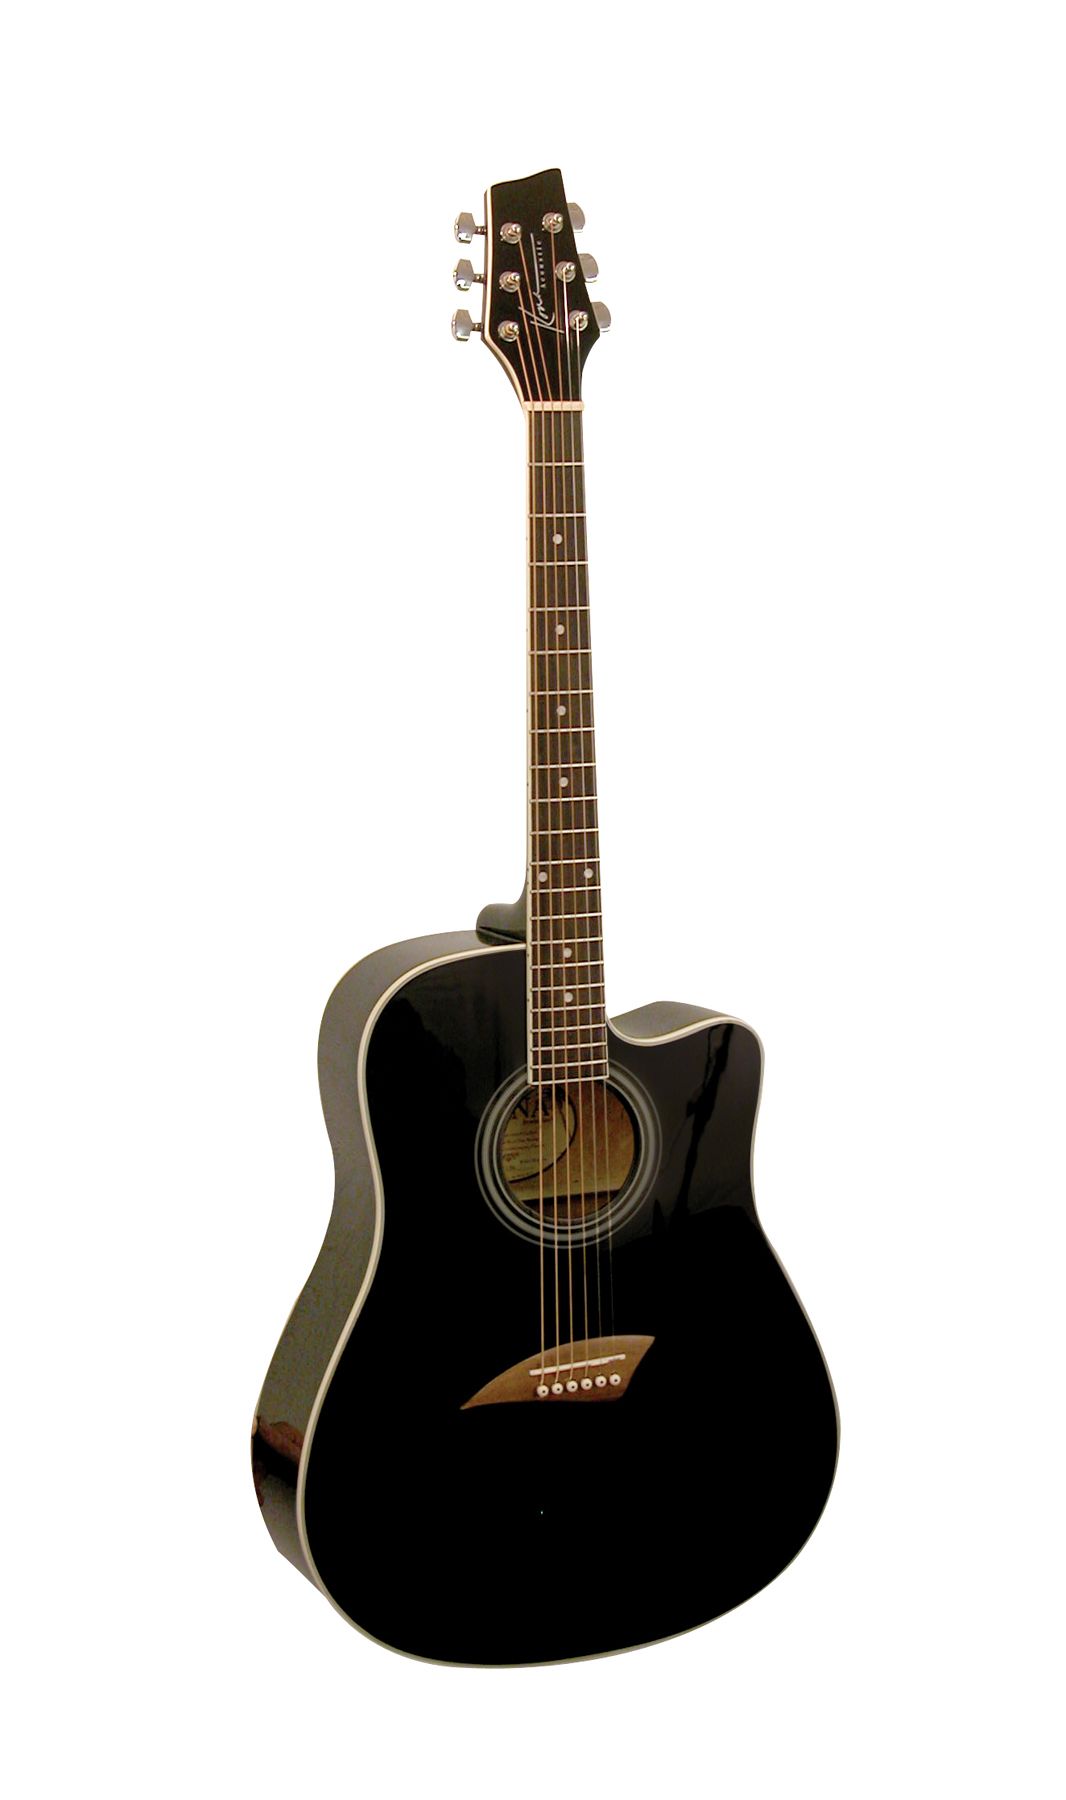 Kona Dreadnought Acoustic Guitar with High-Gloss Black Finish